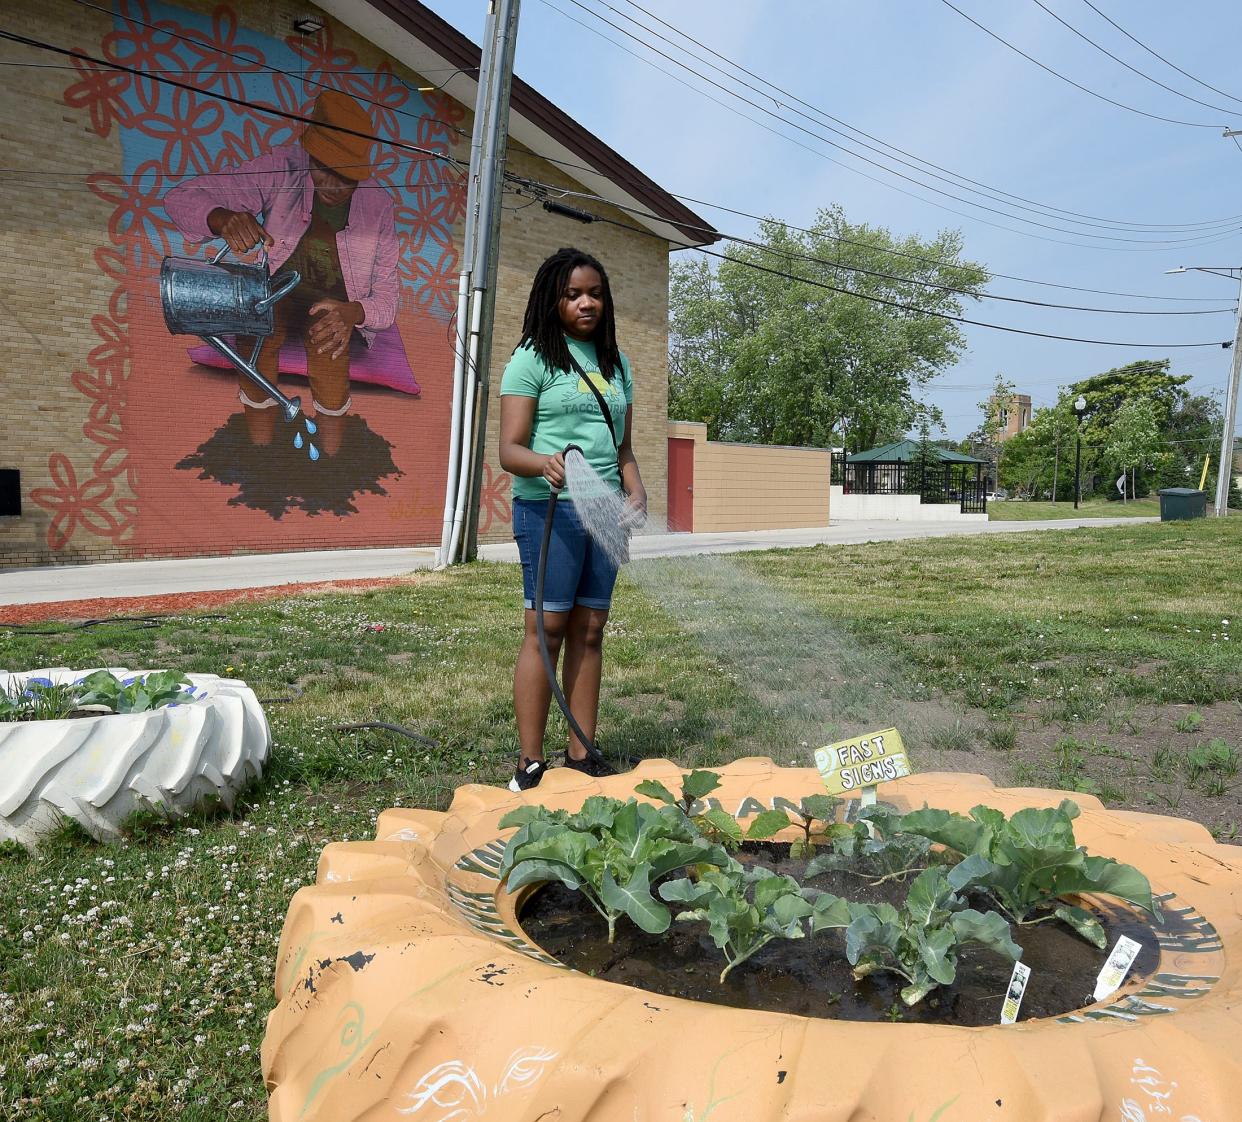 Raven Hoskins waters the vegetable and flower beds outside the Arthur Lesow Community Center in Monroe. Behind is the mural painted by artist Richard Wilson, a native of London, United Kingdom, who gained local attention for his work as a muralist in Detroit.